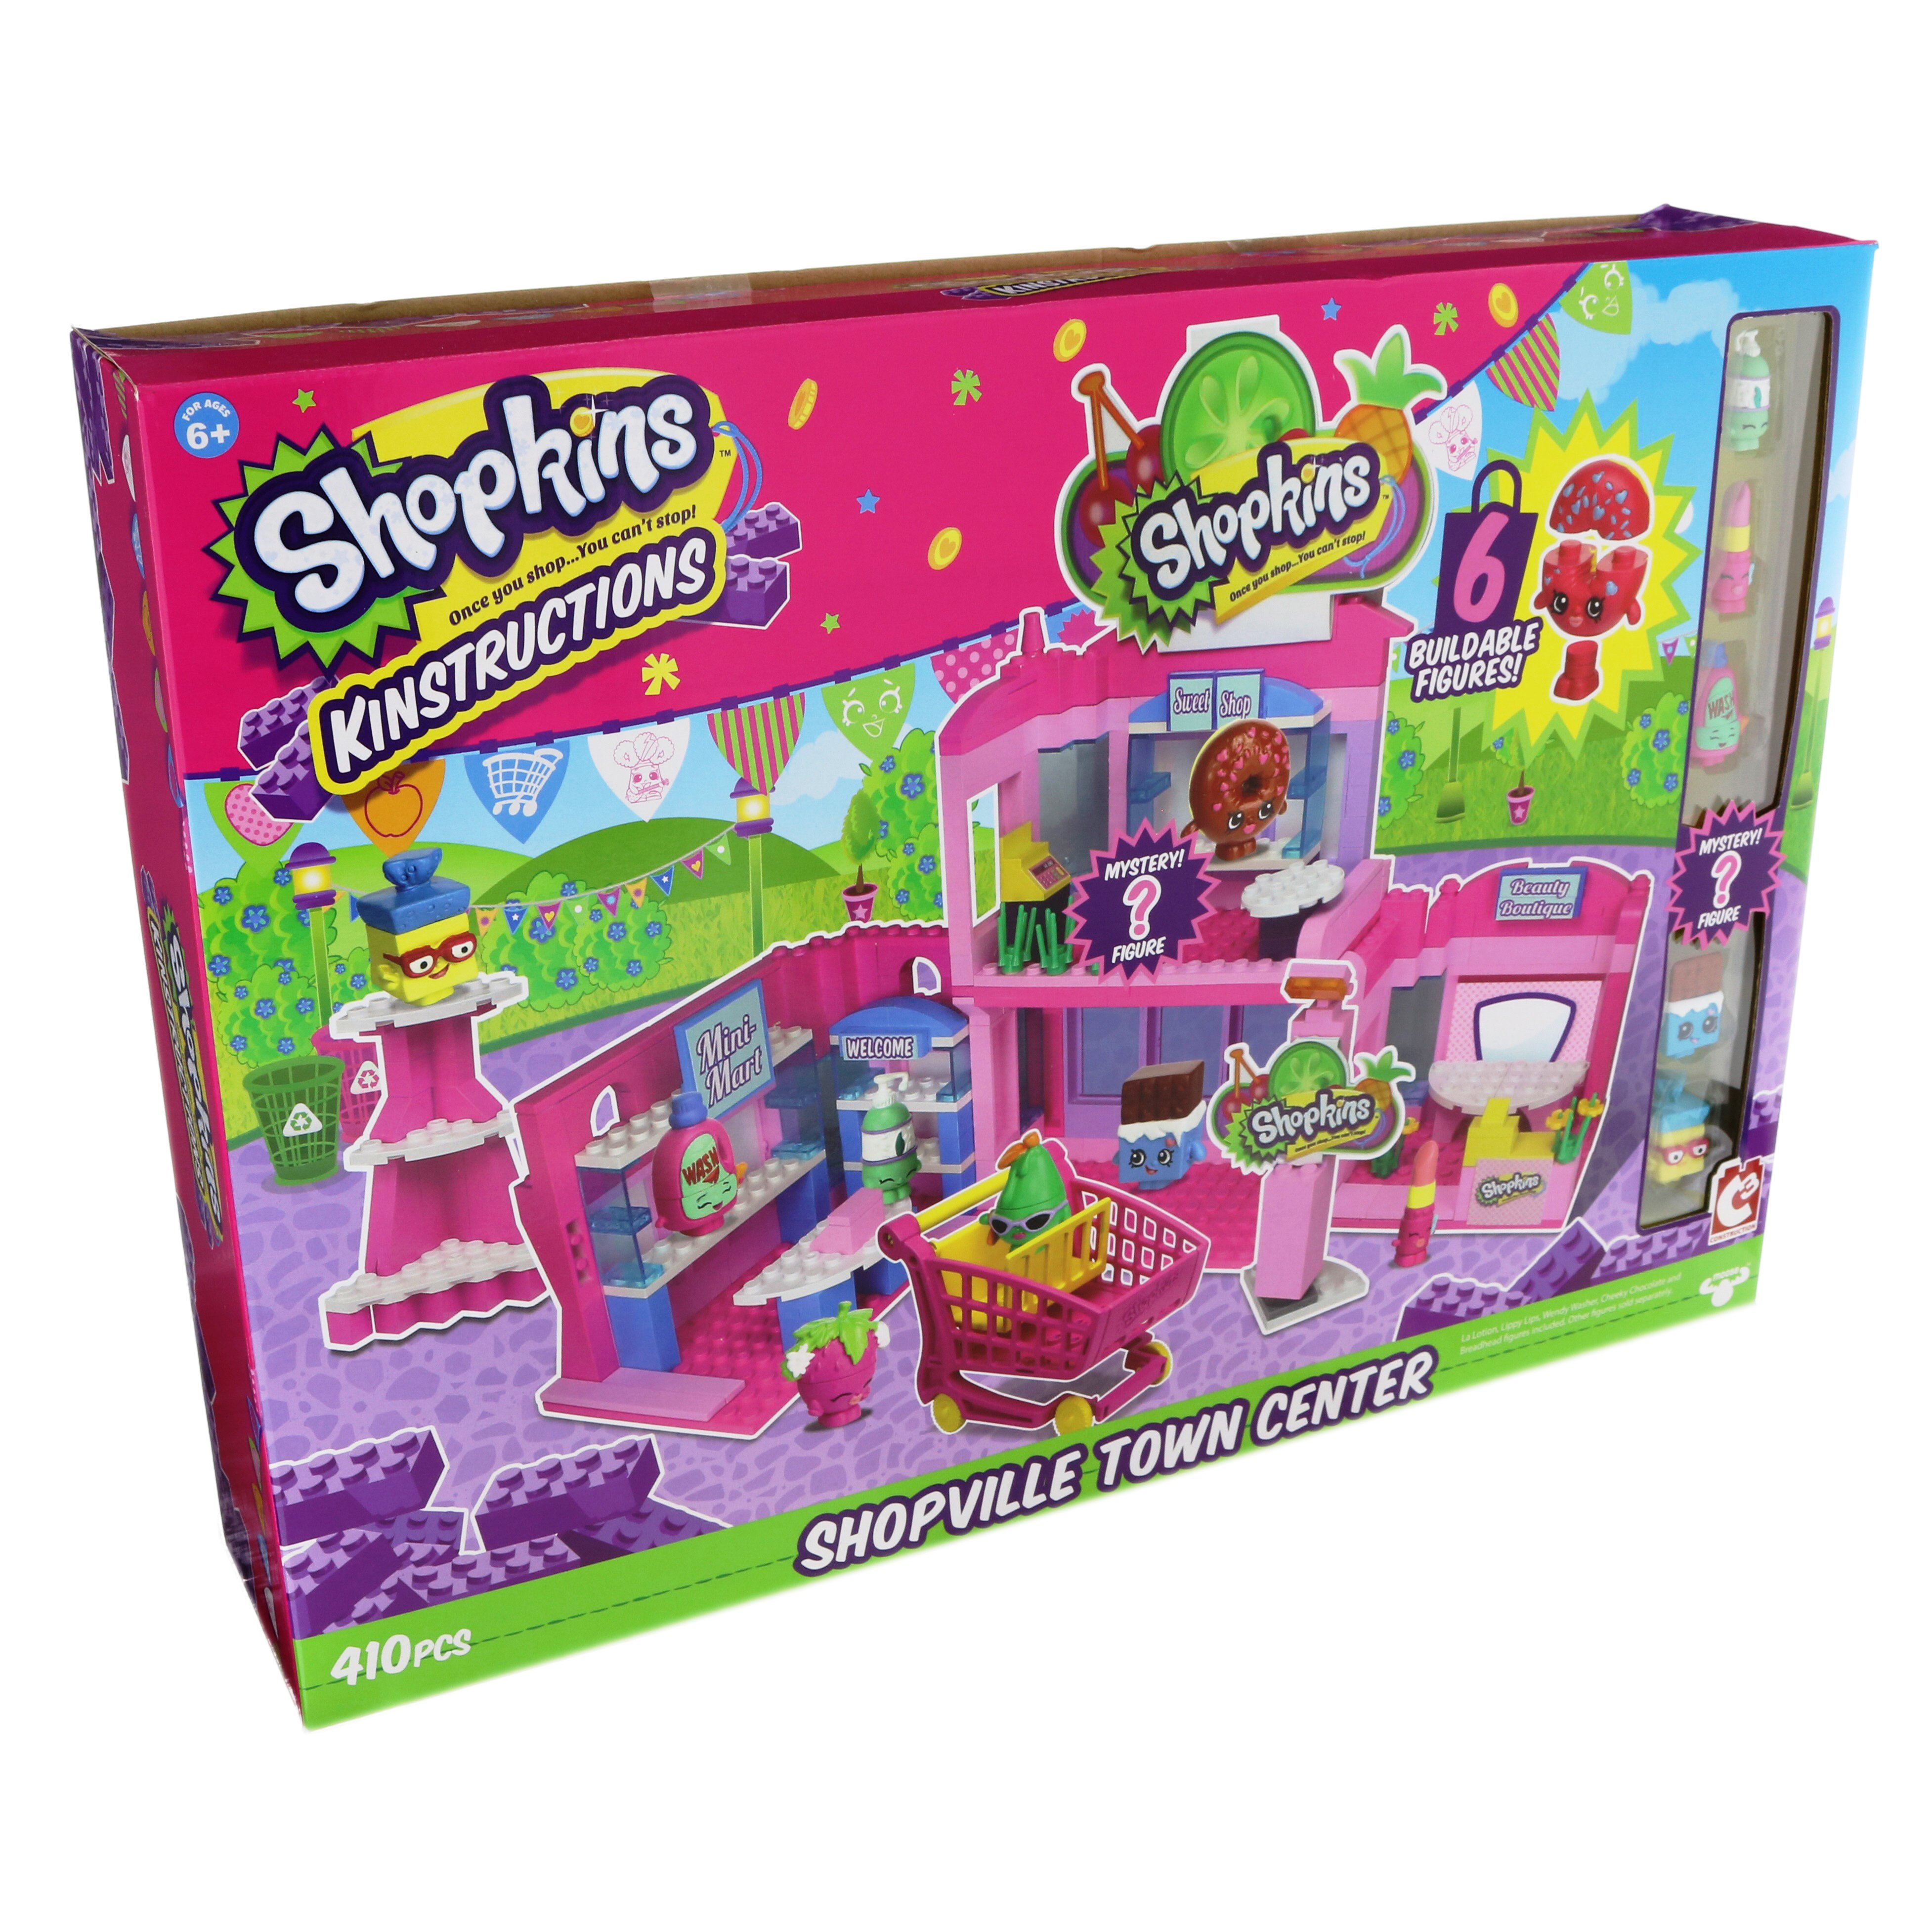 Shopkins Shopville Town Center Instructions I need to build 3 new ...